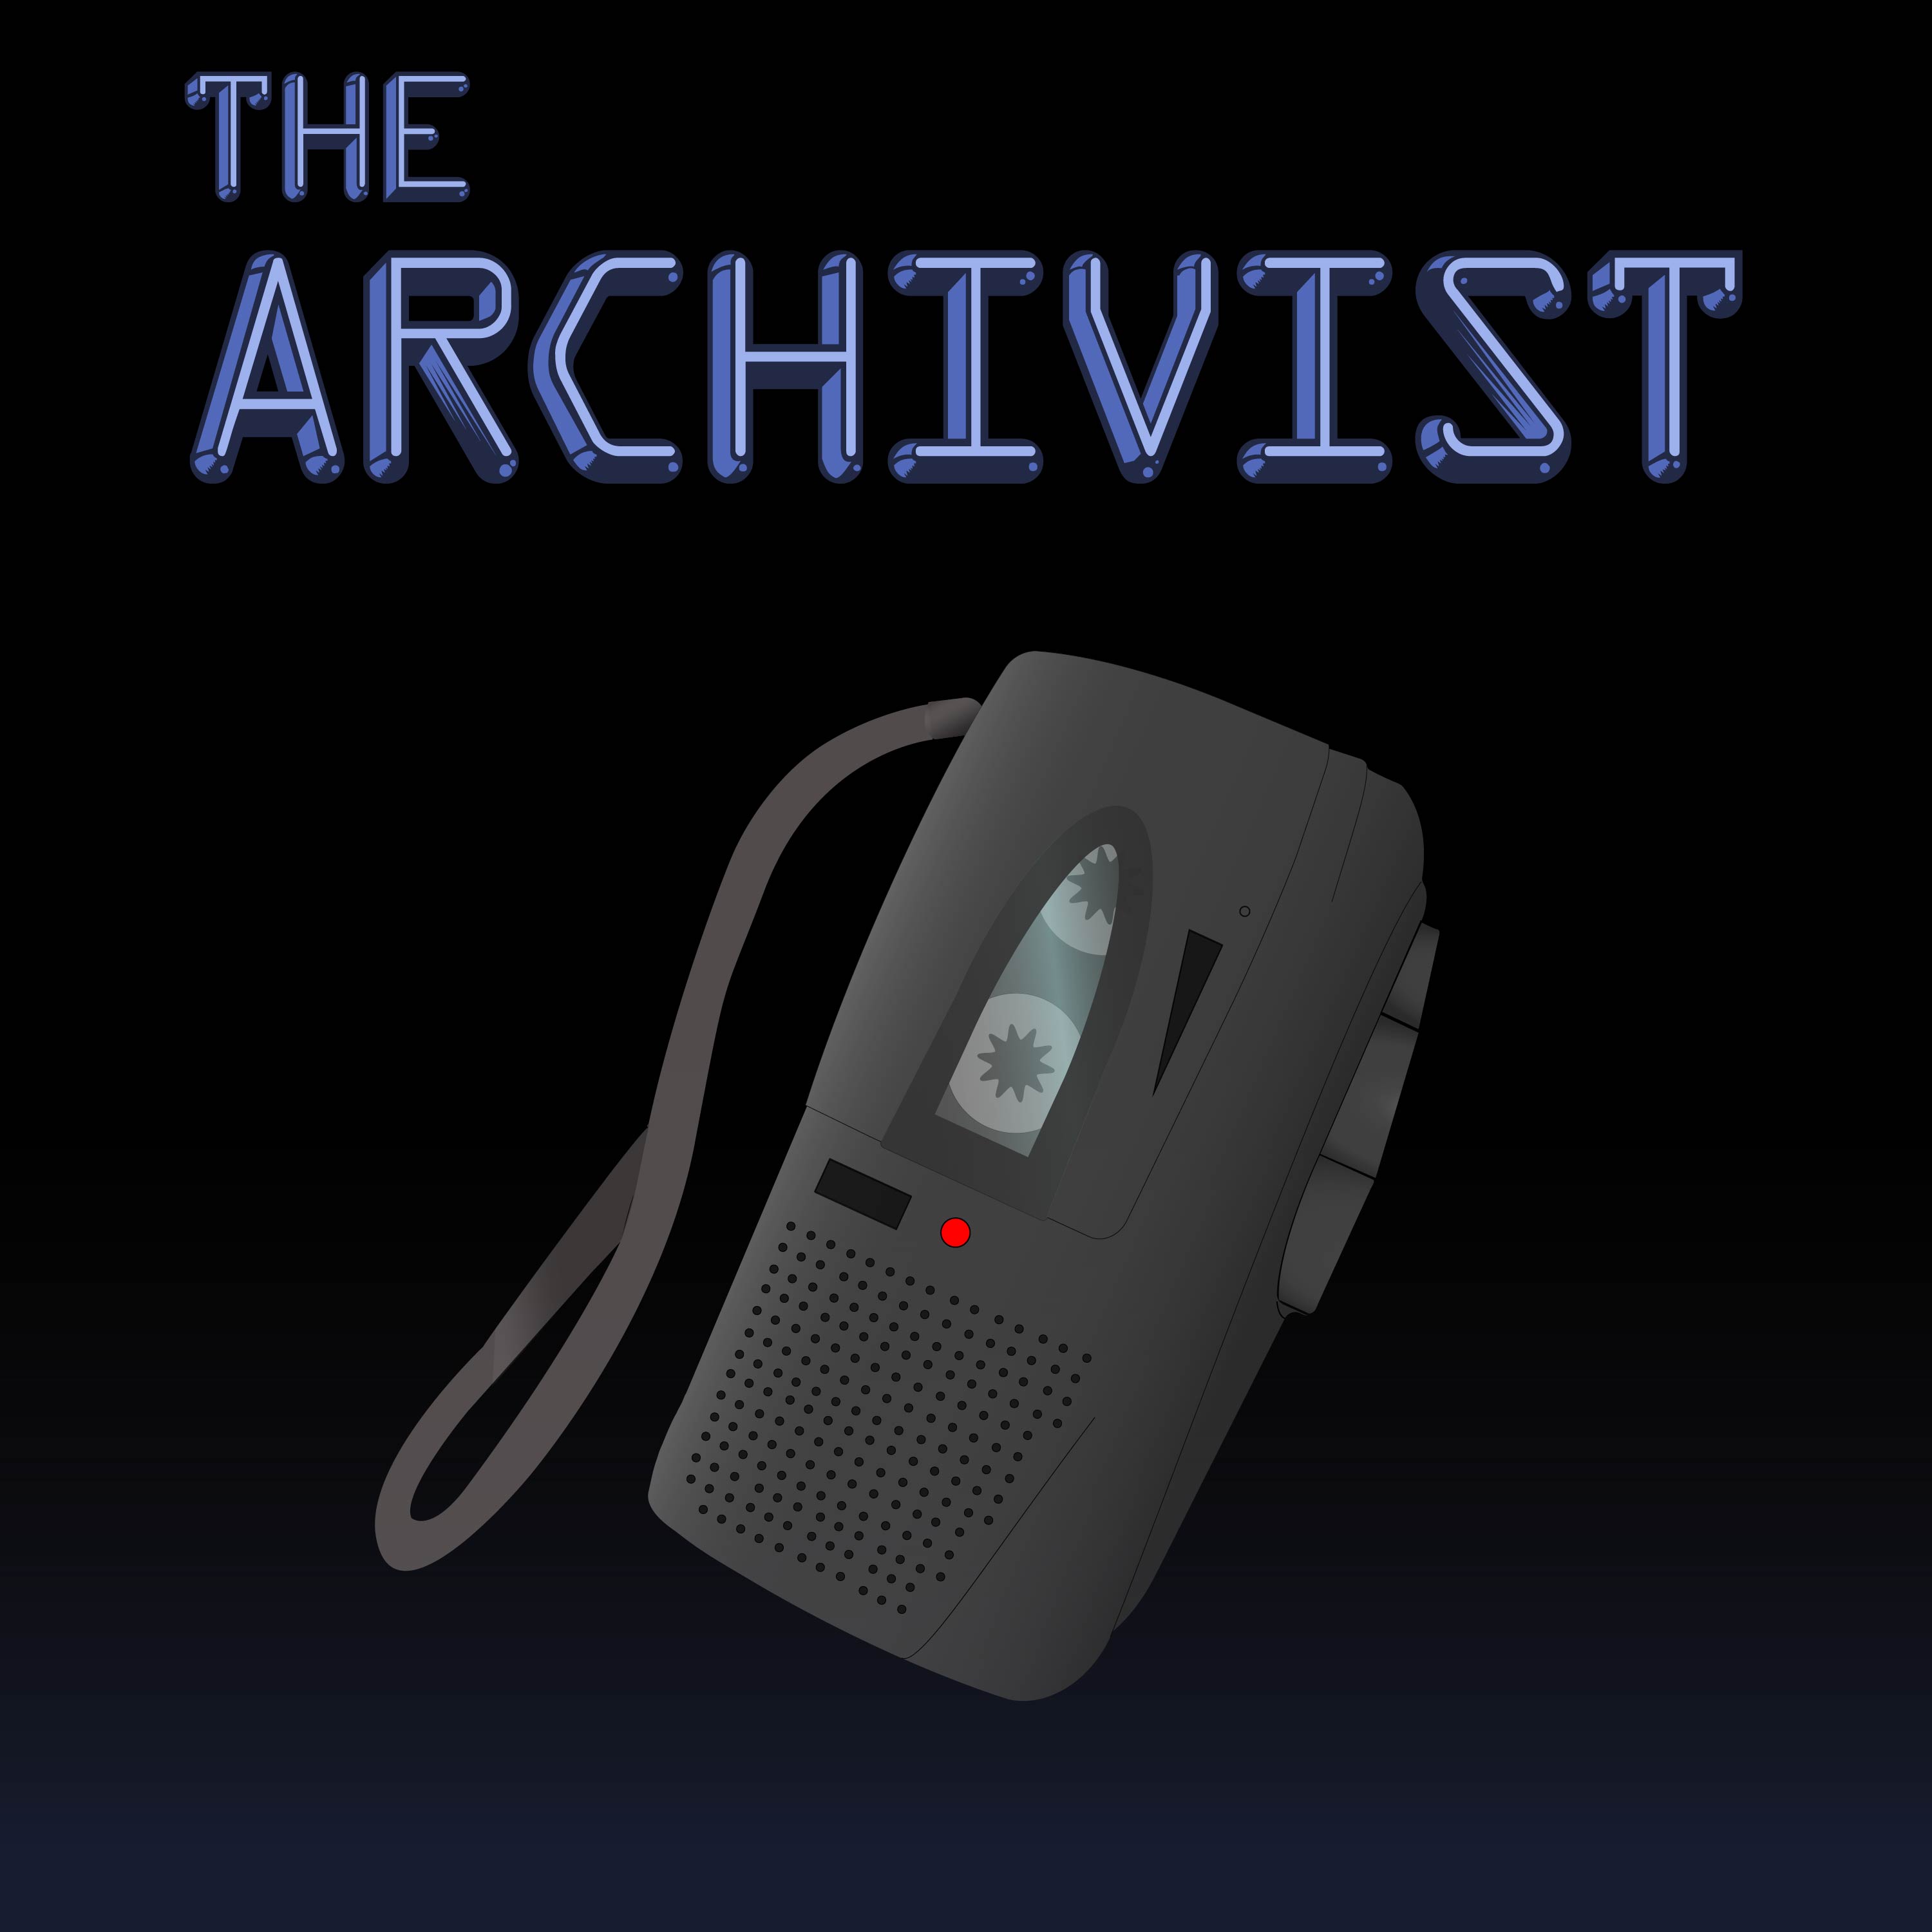 "The Archivist" Podcast